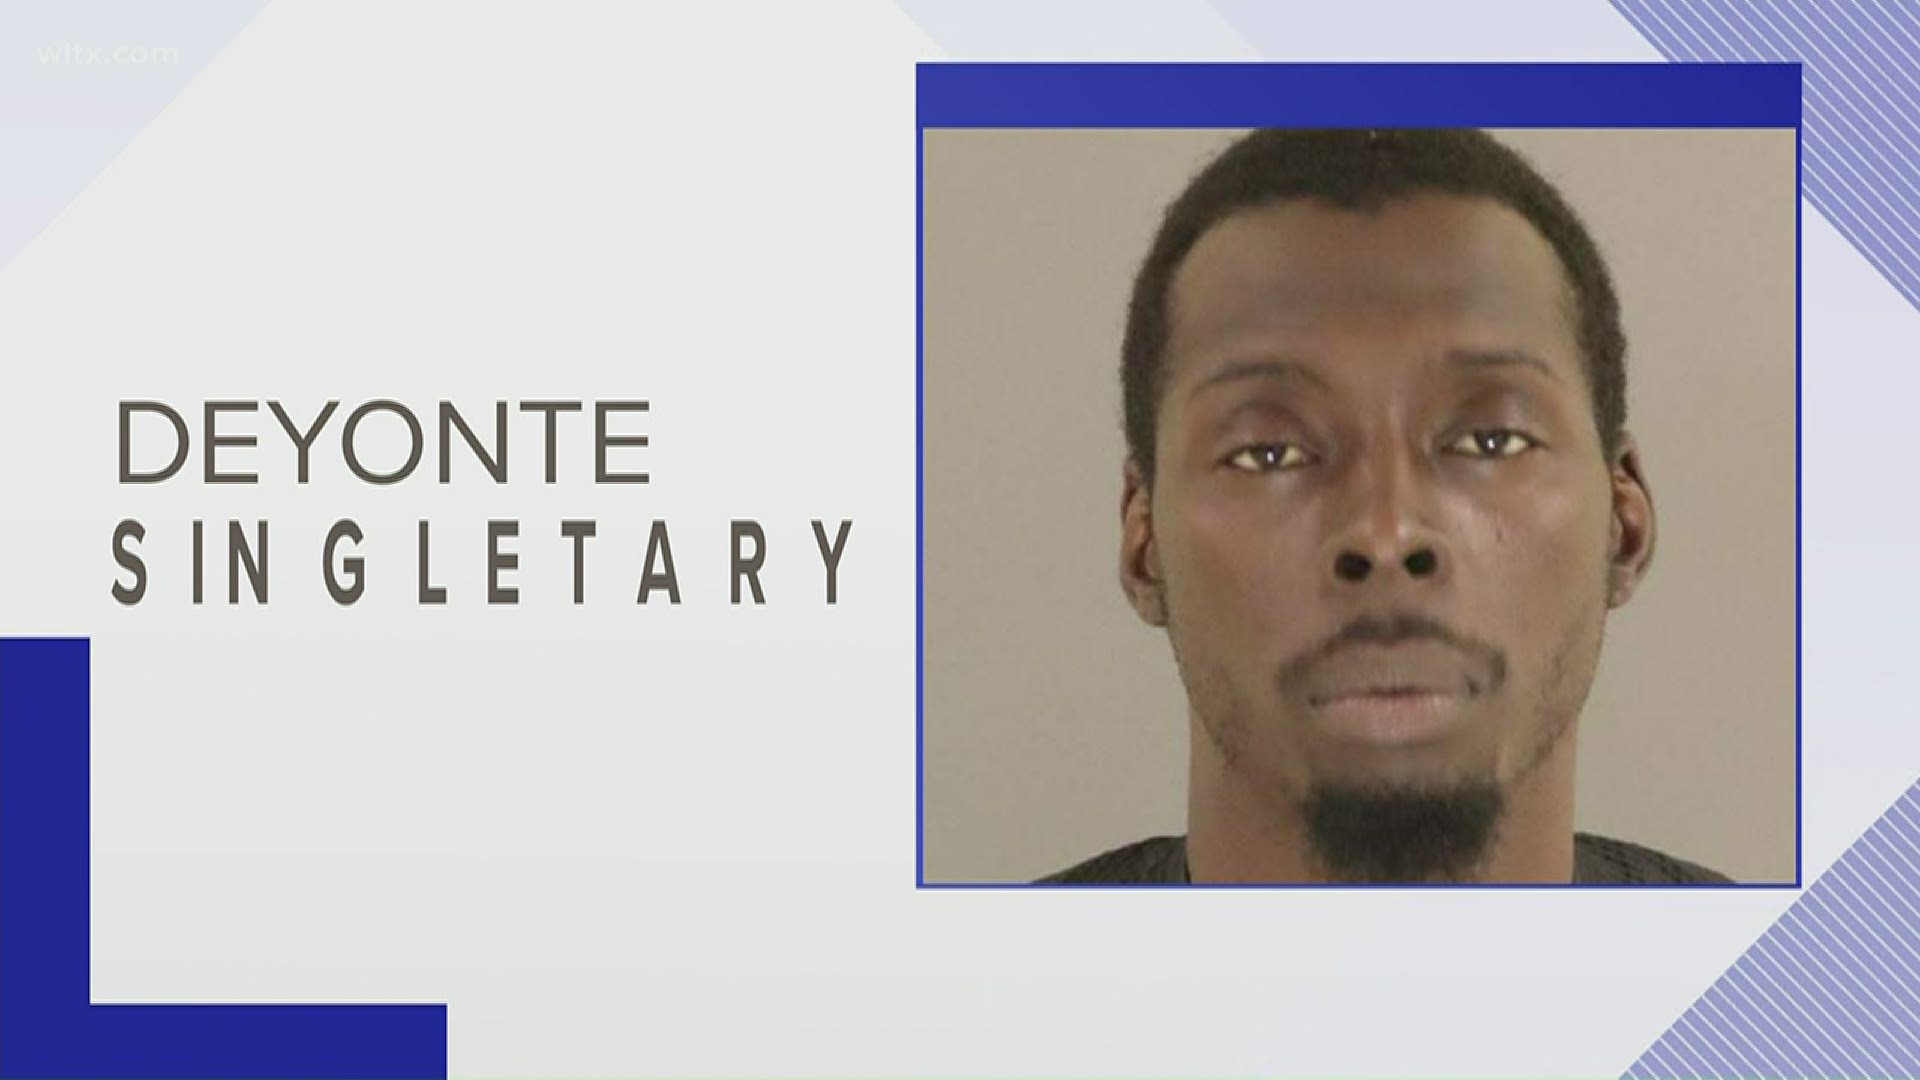 Deyonte Singletary is wanted on multiple charges from a series of incidents on April 28 in the Brand and Royal streets area.